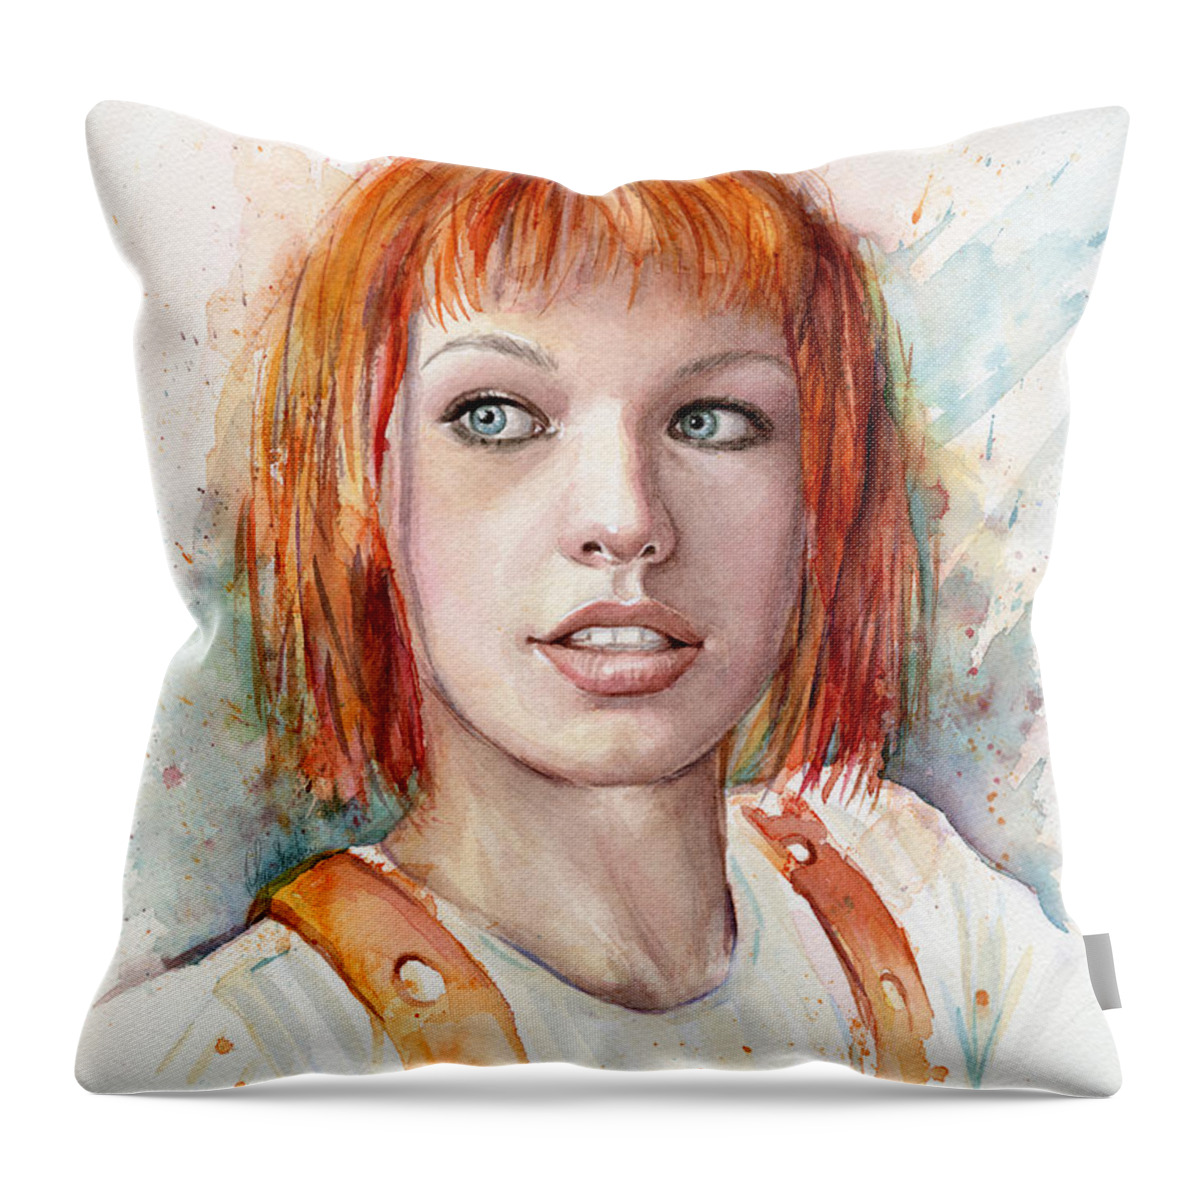 The Fifth Element Throw Pillow featuring the painting Leeloo by Olga Shvartsur